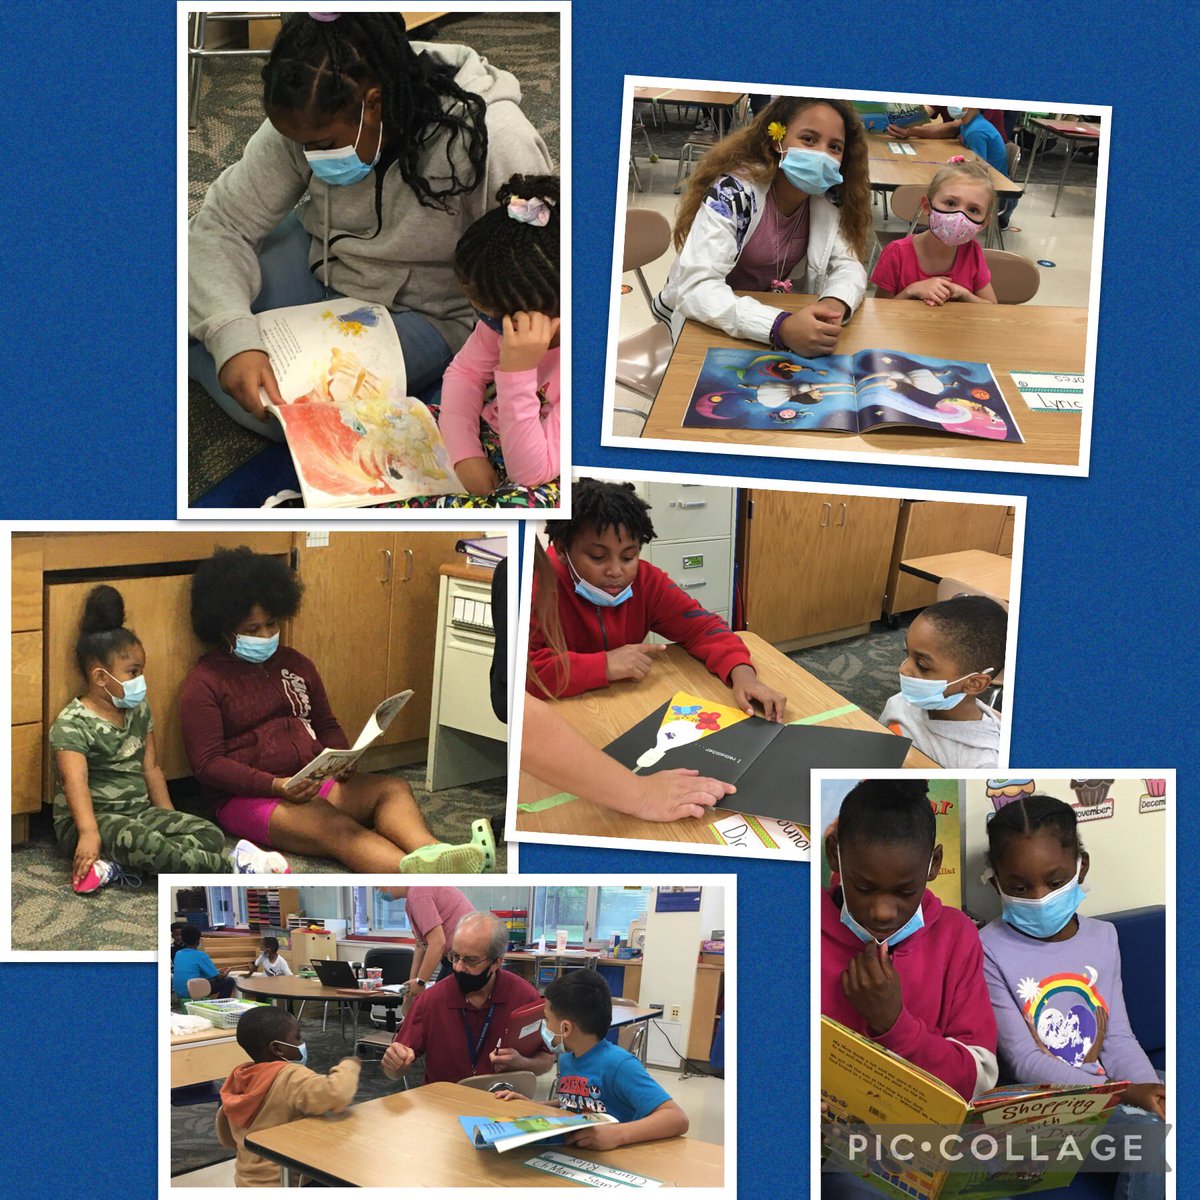 Reading Buddies=Building community in the school and promoting reading. 😊#TYHochadelMeyersBussBolzner❤️@rcsdsch33 @RCSDNYS #lovewhatIdo